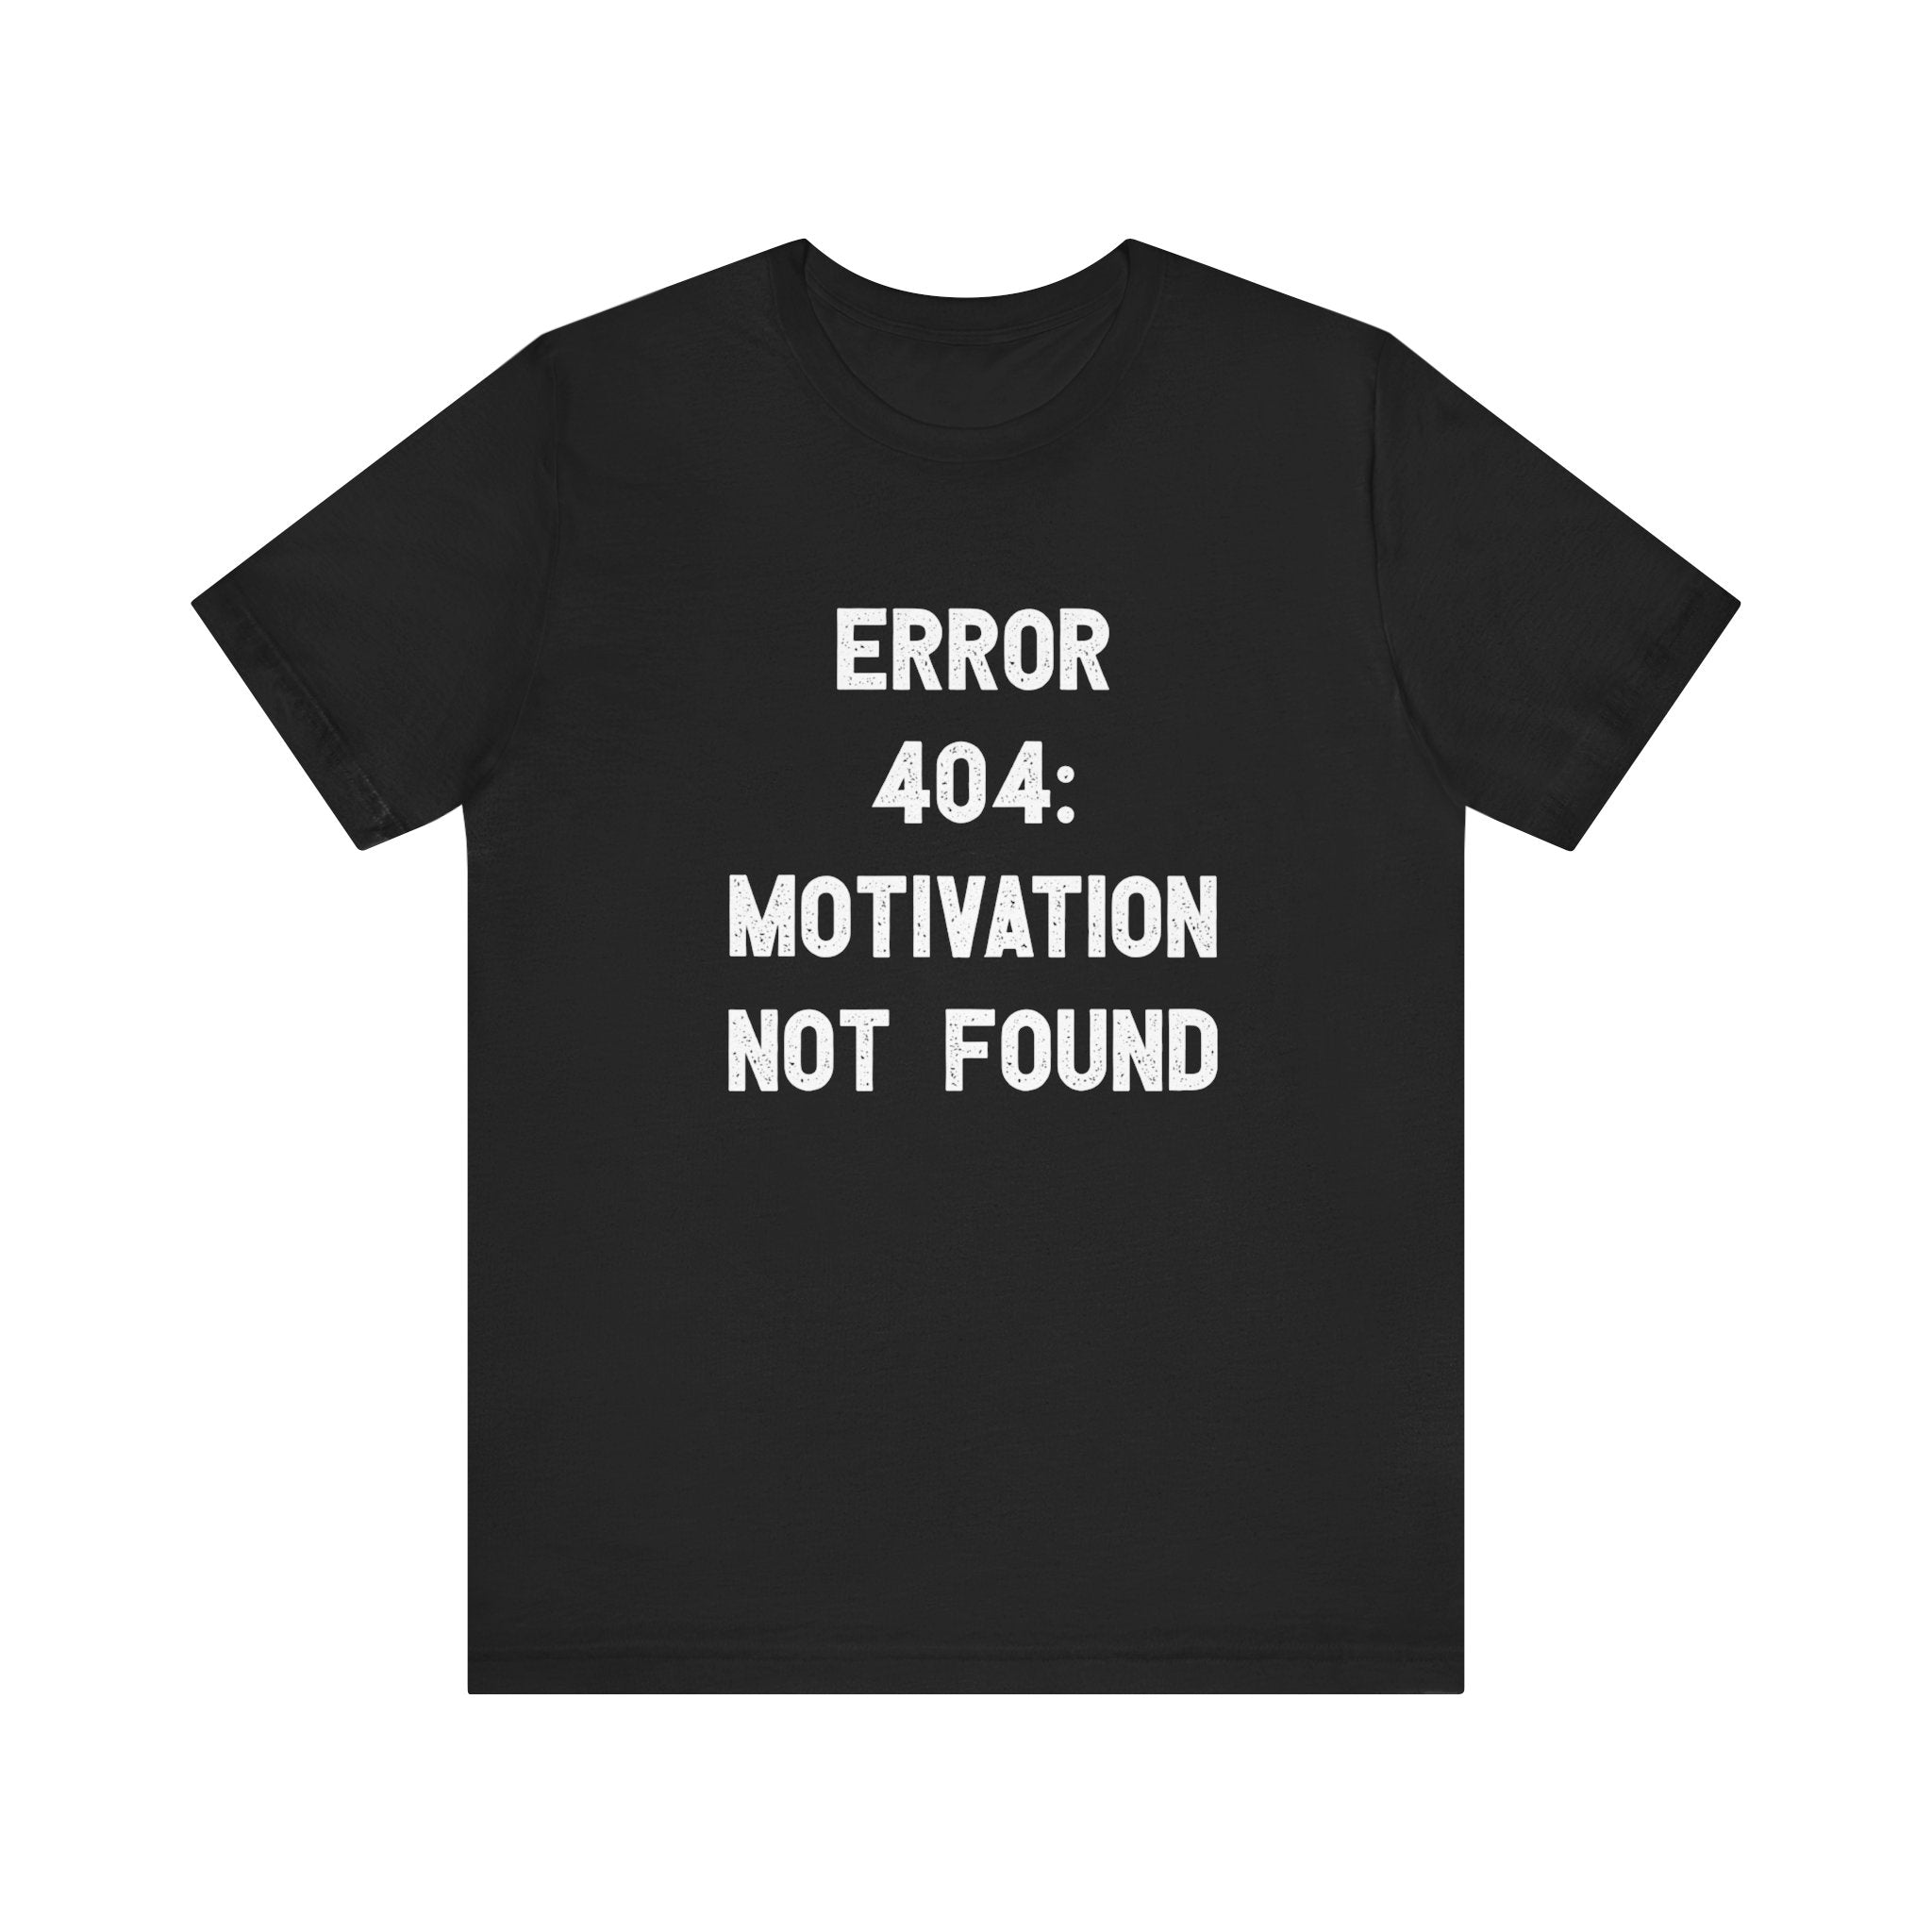 Error 404: Motivation not found - T-Shirt with white text reading "ERROR 404: MOTIVATION NOT FOUND." This comfortable cotton shirt combines humor and style, perfect for casual days.